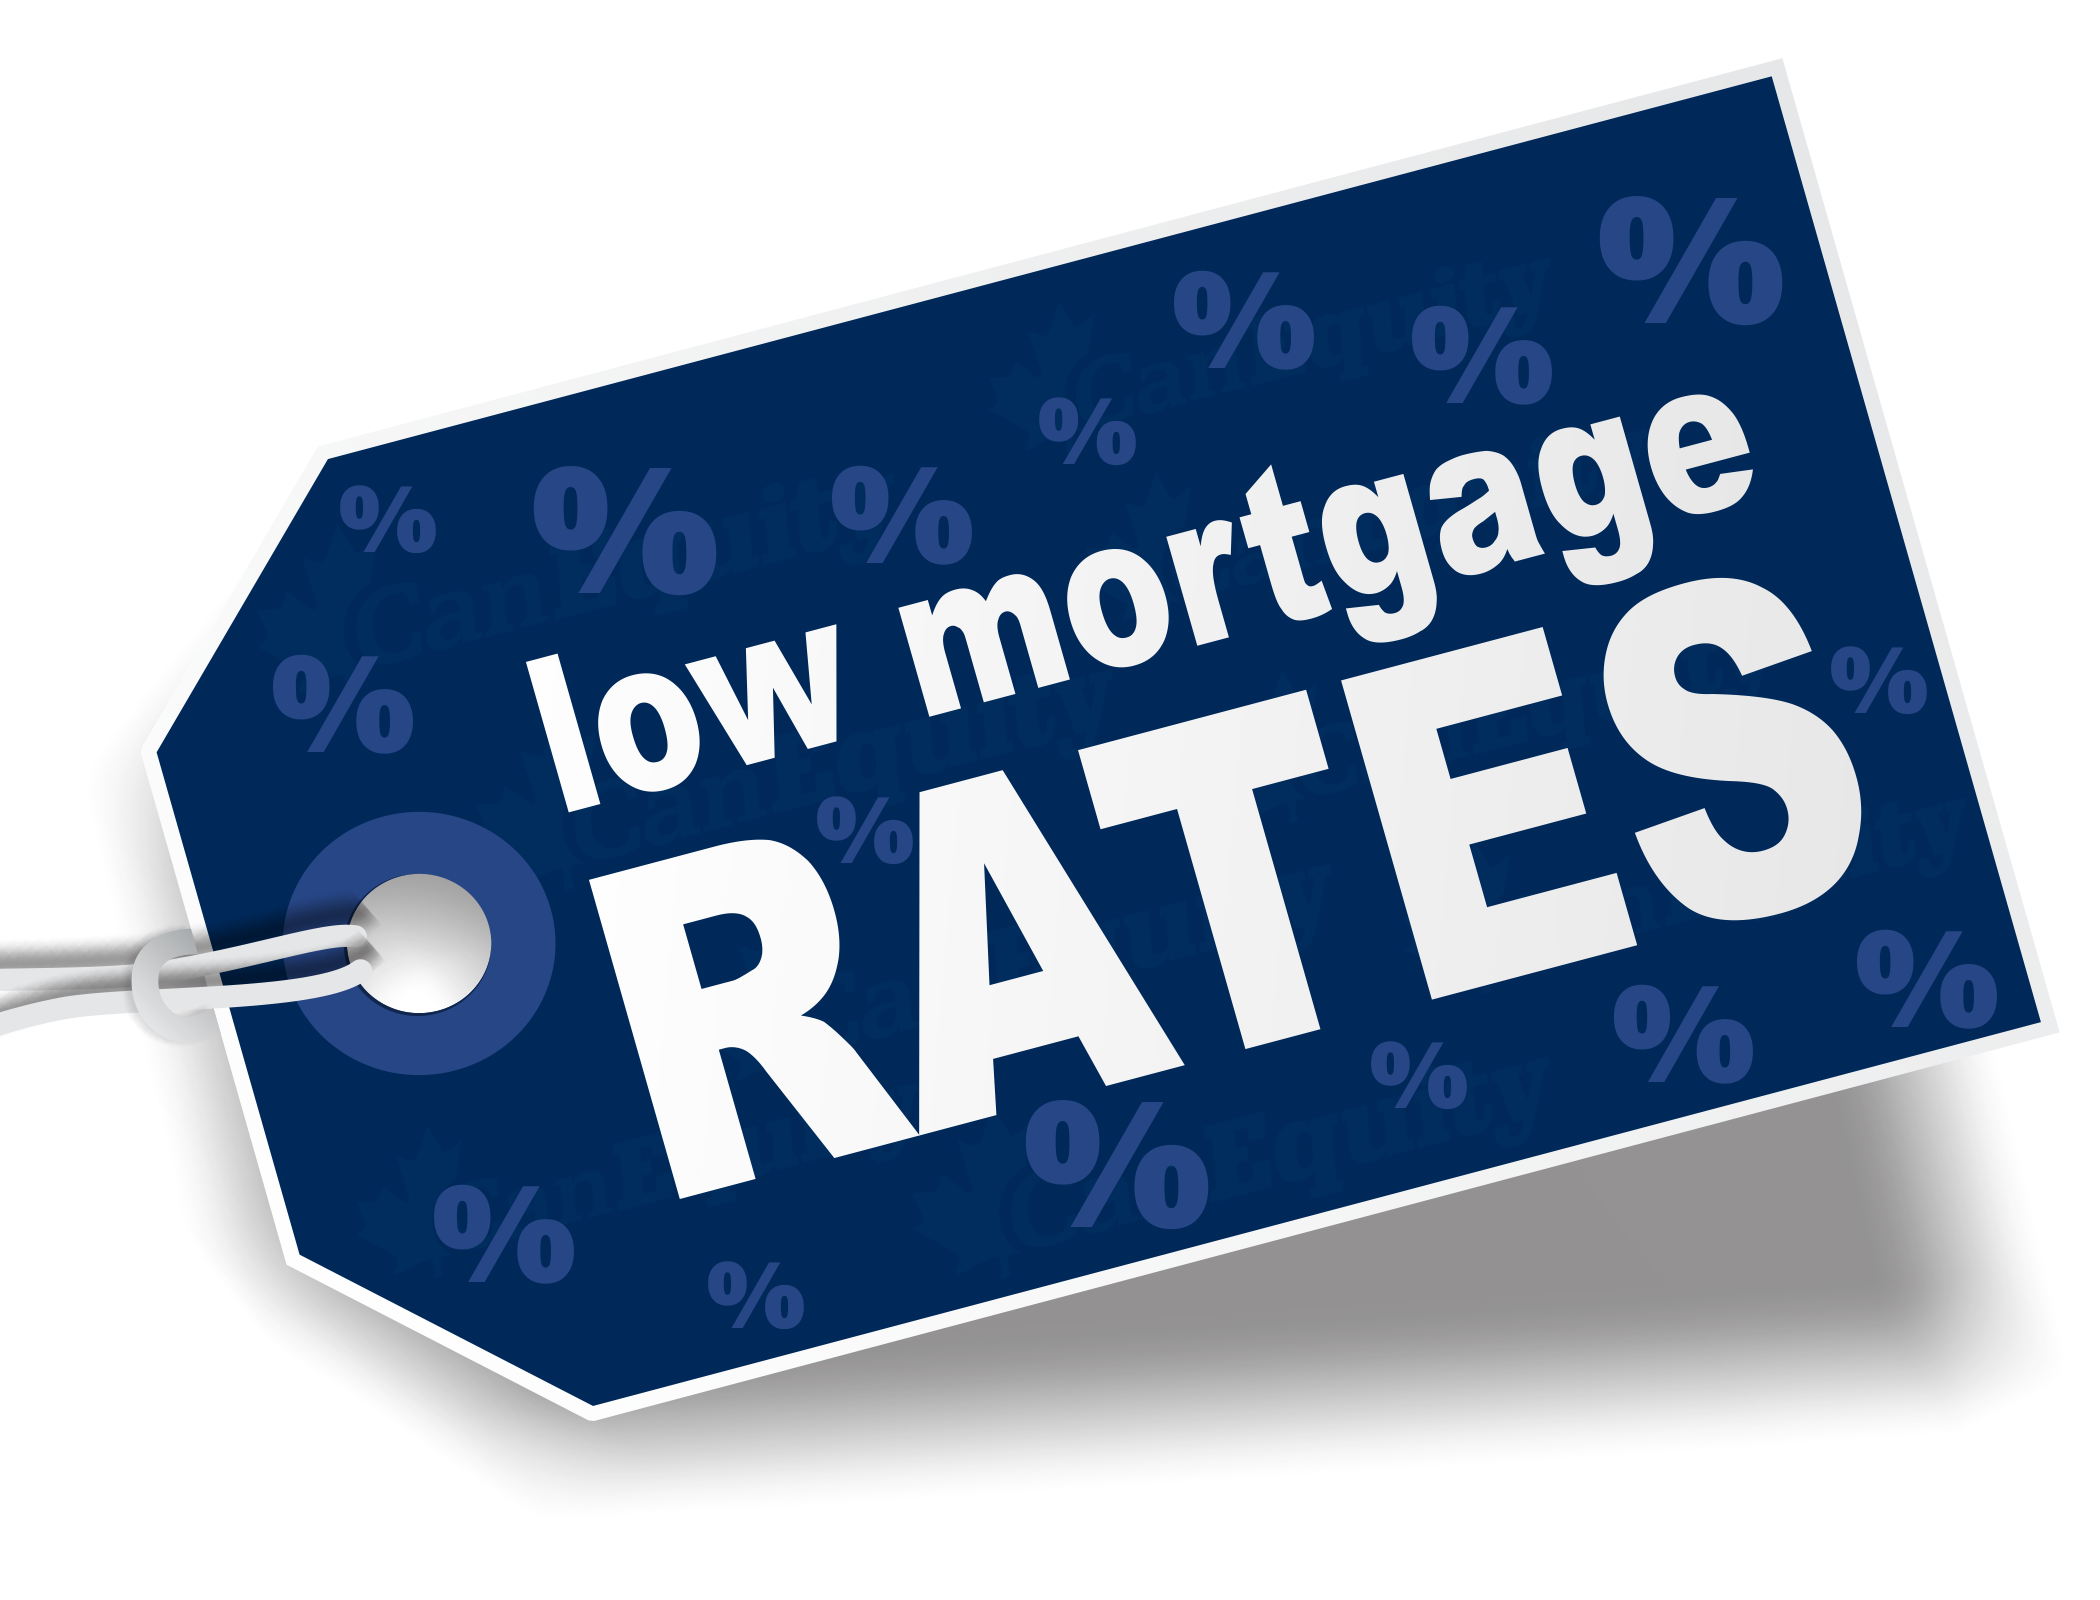 Do Mortgage Brokers get better rates?